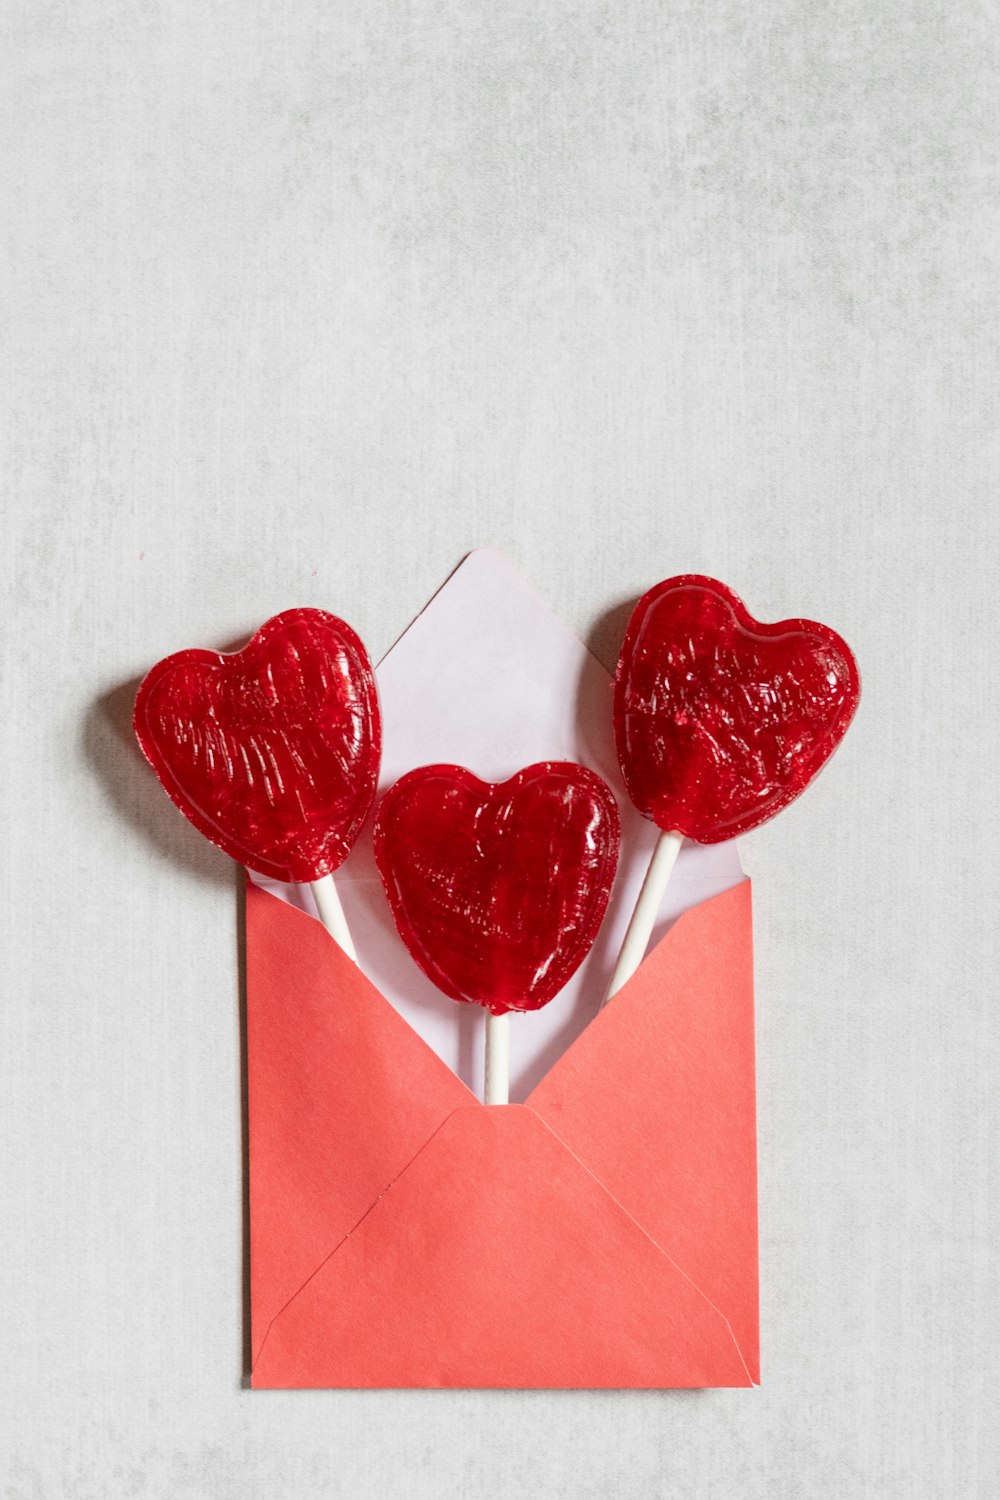 two heart shaped lollipops sticking out of an envelope